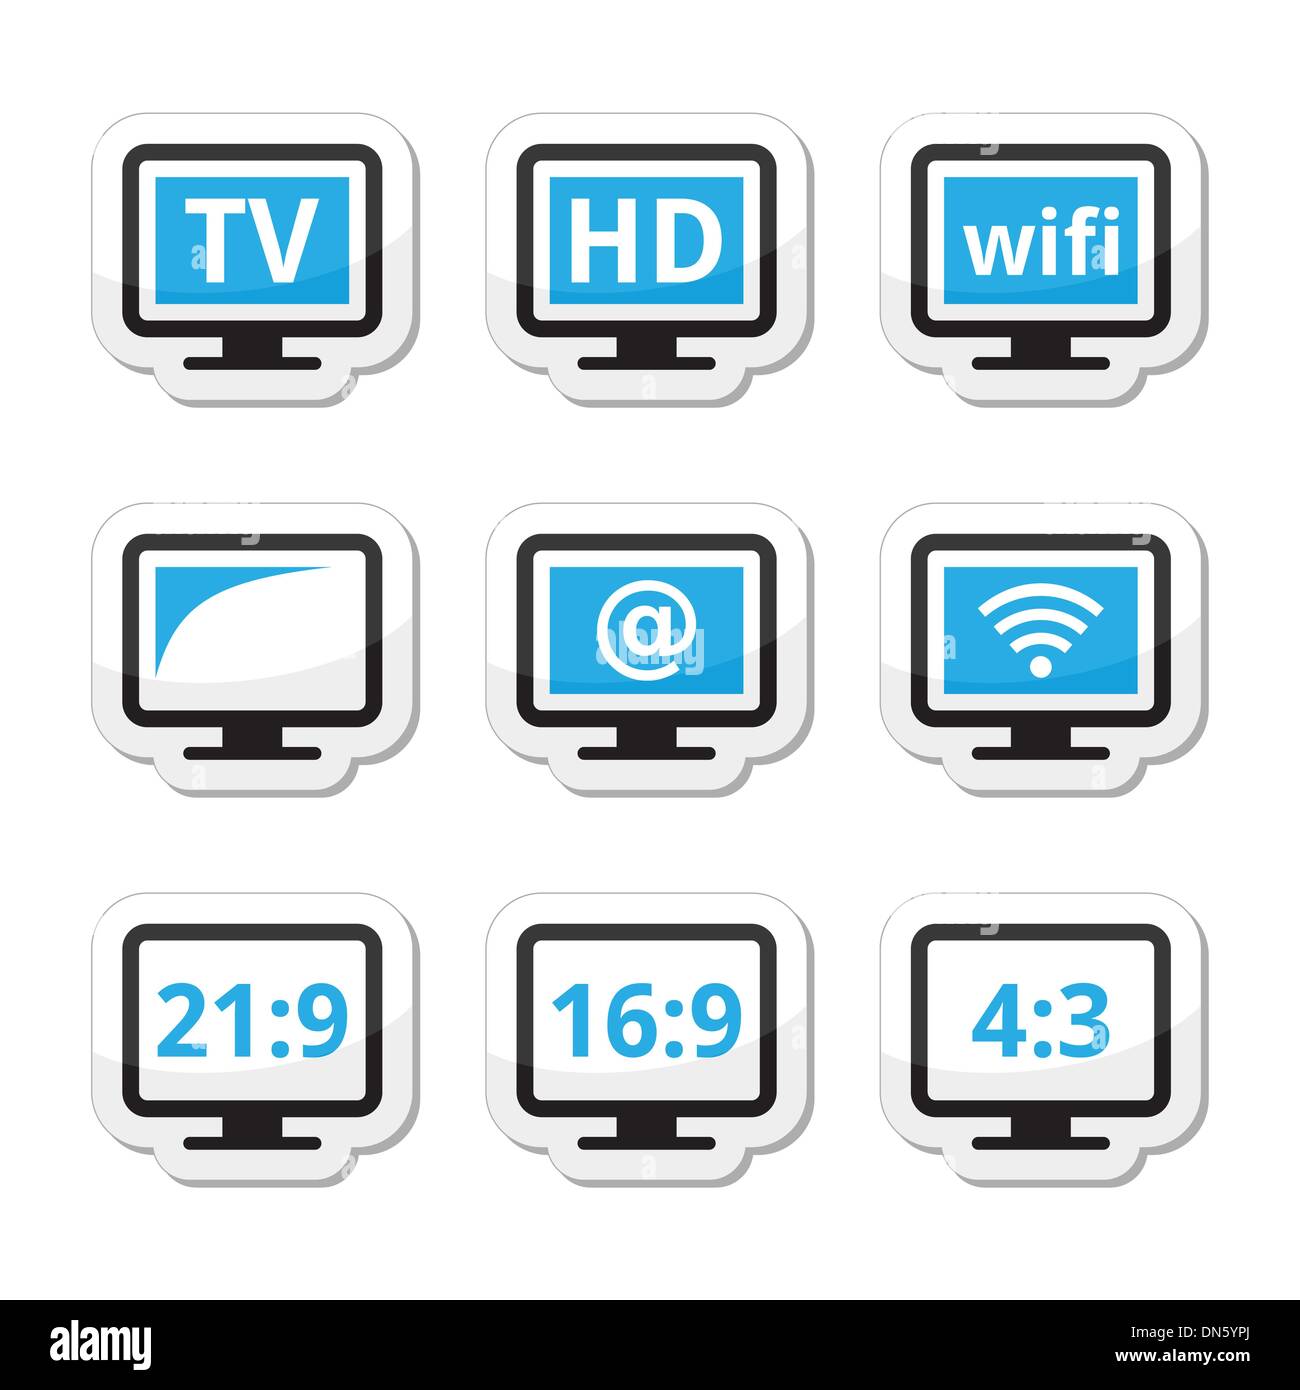 Find Smart, High-Quality hd decodificador tv digital for All TVs